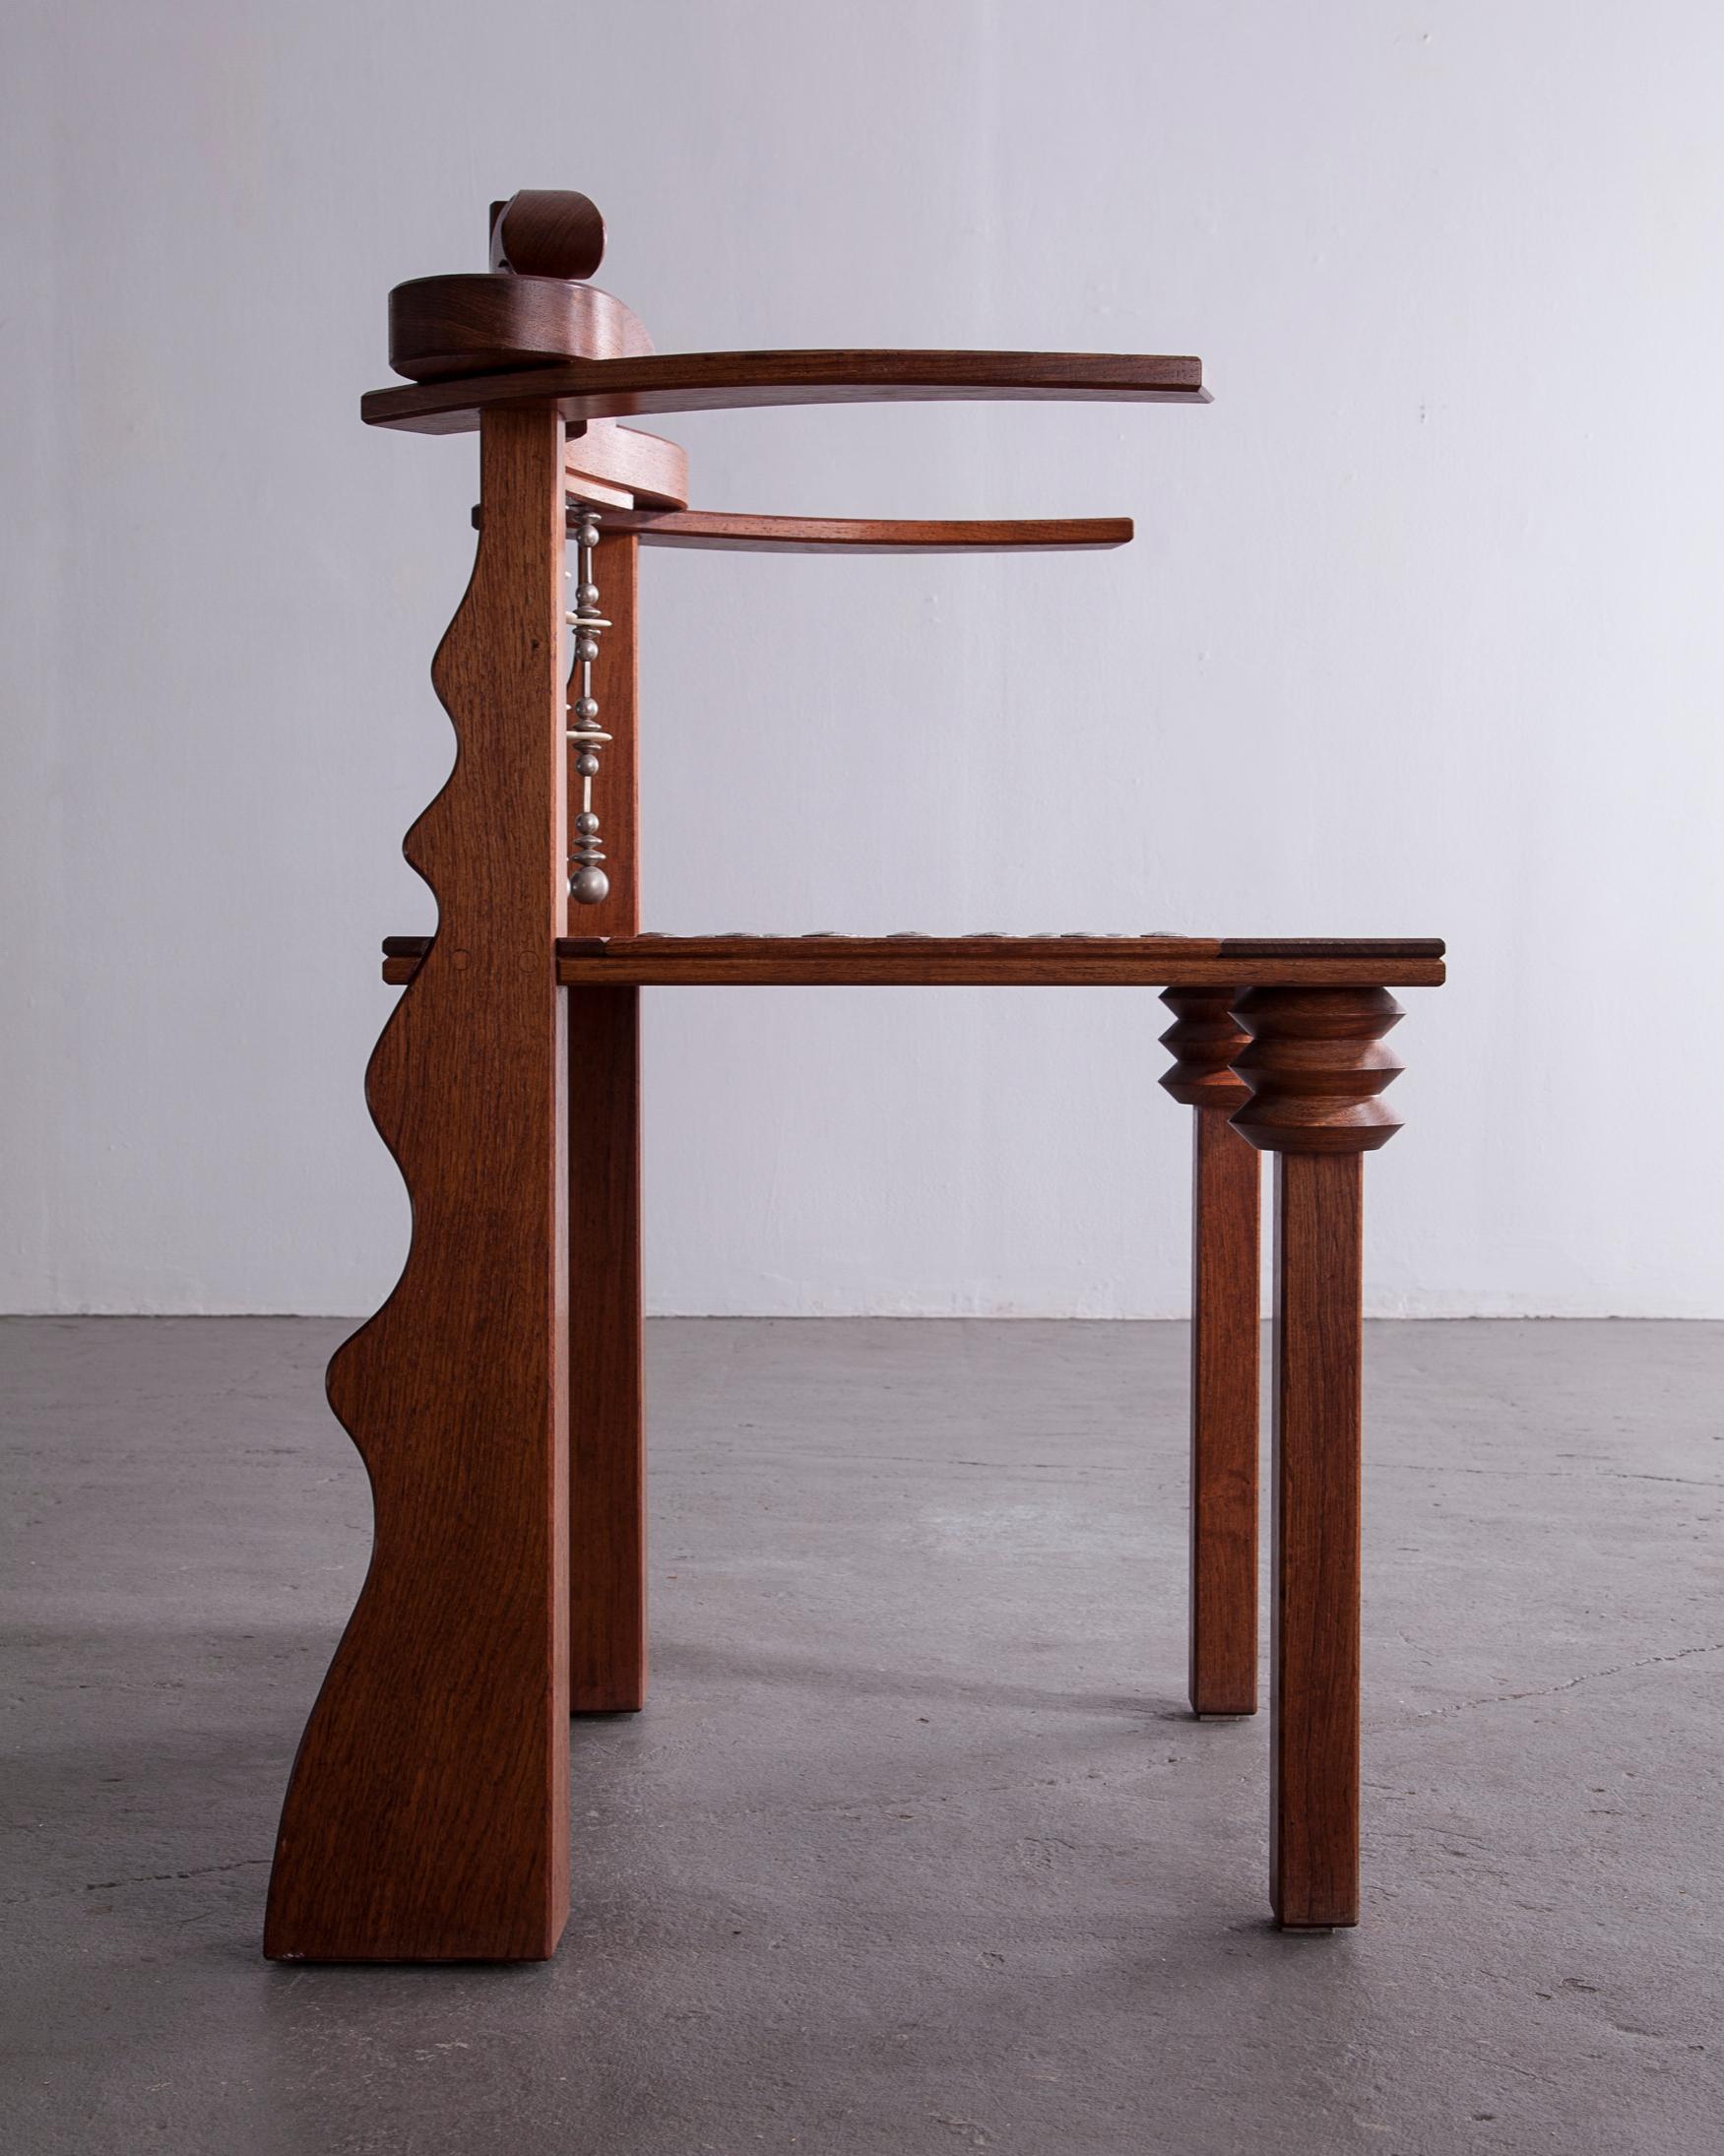 Modern African Chair in Claro Walnut and Beads by Garry Knox Bennett, 1988